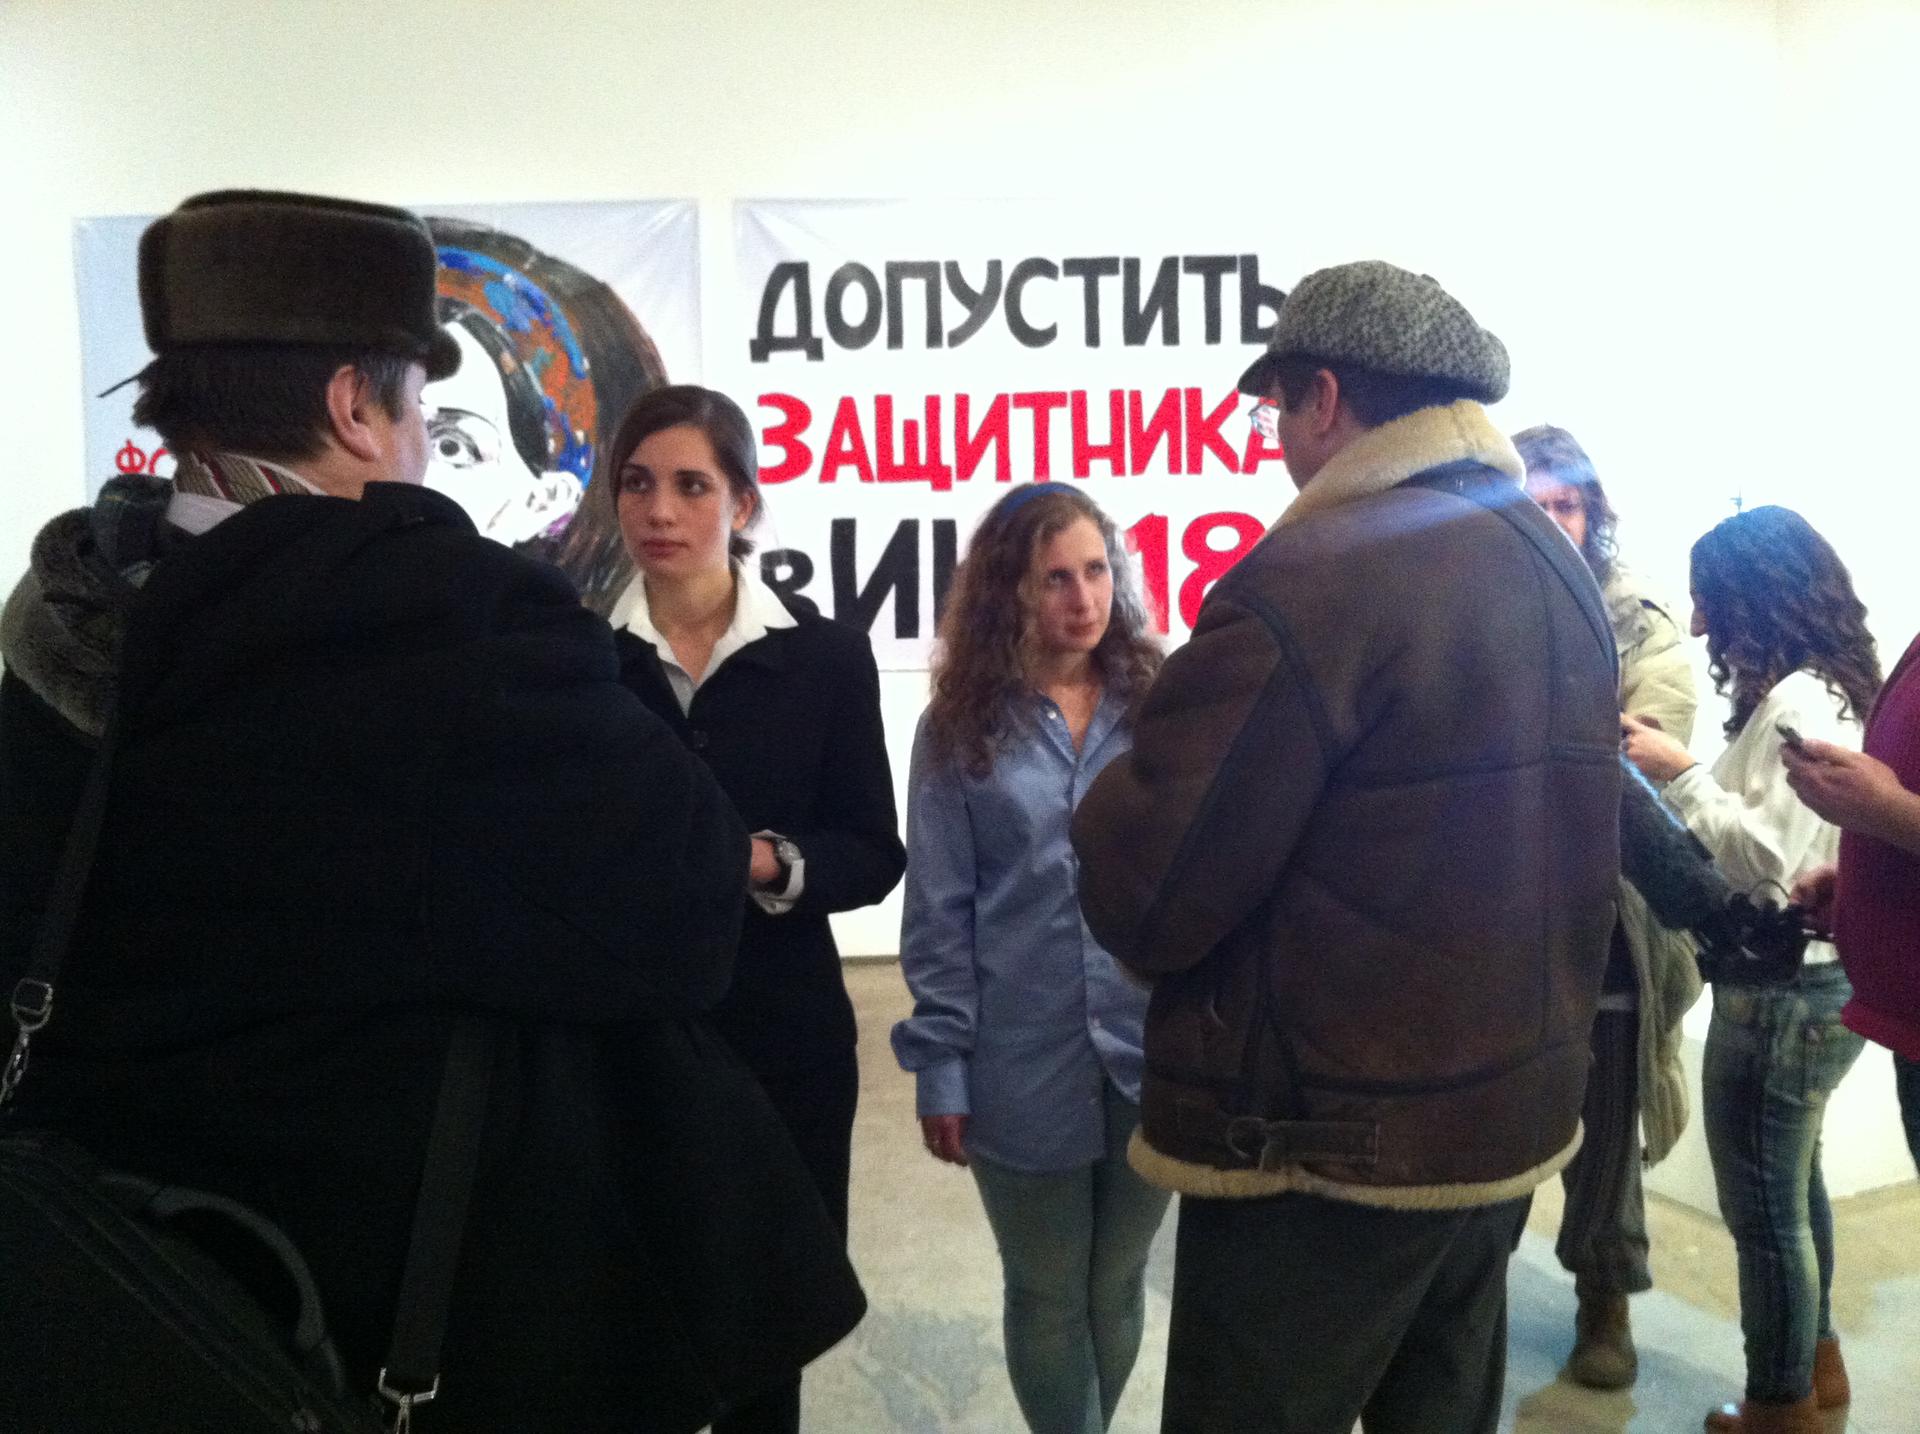 Pussy Riot's Nadezhda Tolokonnikova and Maria Aliokhina speak with two supporters at the Vinzavod Center for Contemporary Art in Moscow. Many wanted to speak with them about prison conditions in Russia.